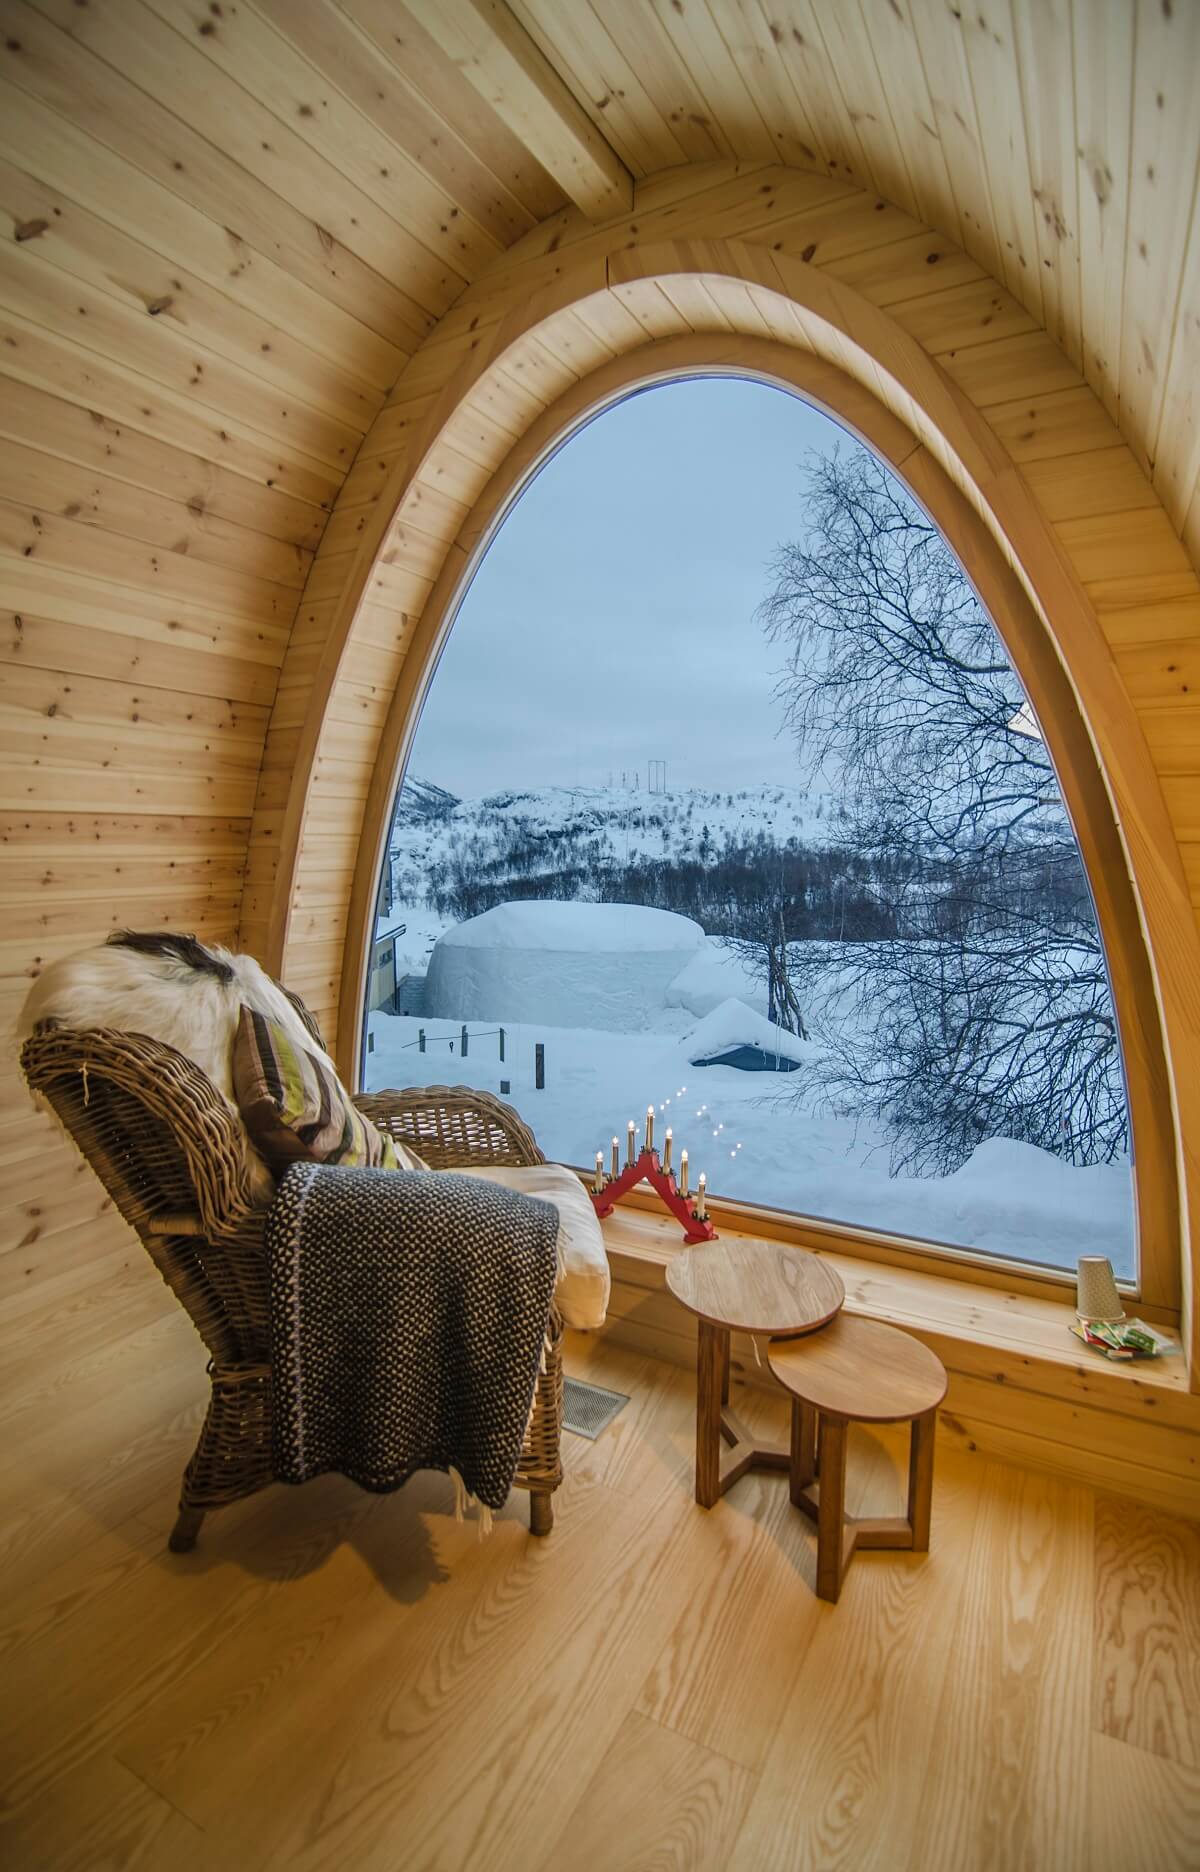 A Cozy Place with a Winter Wonderland View